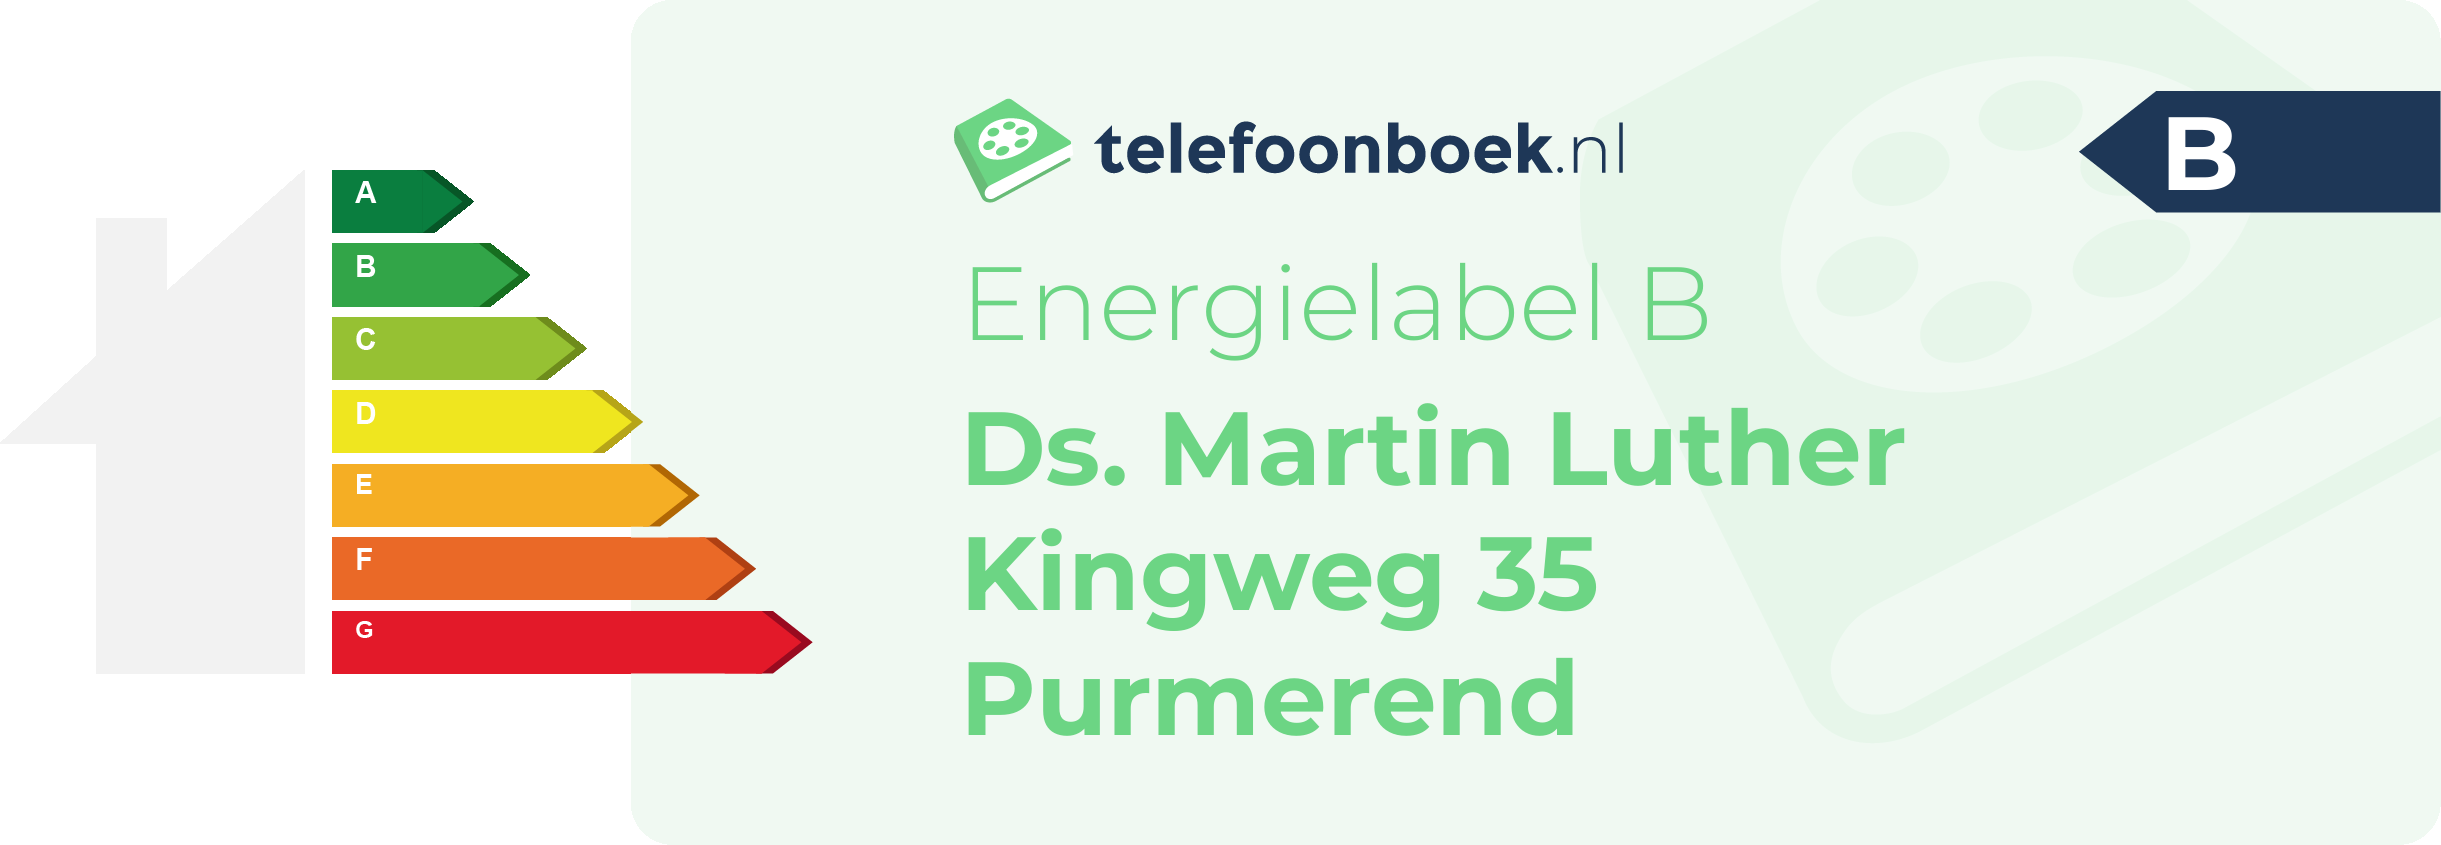 Energielabel Ds. Martin Luther Kingweg 35 Purmerend